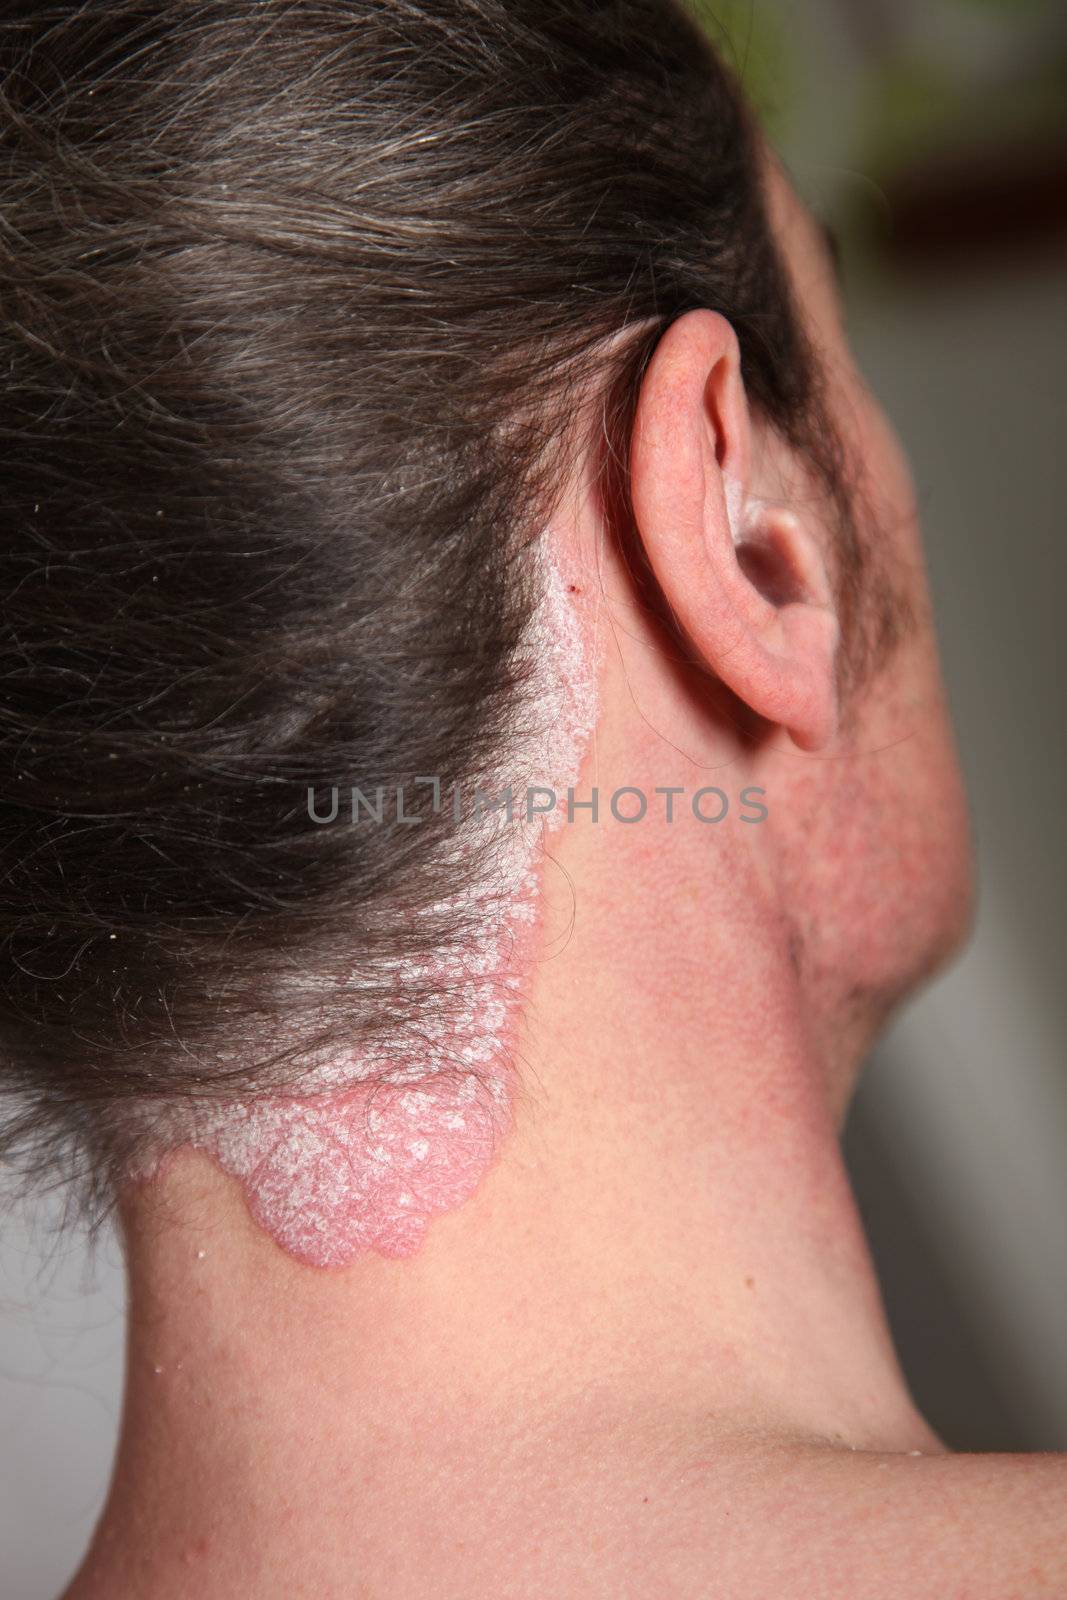 Severe psoriasis neck and neck as well as in the ear by Farina6000